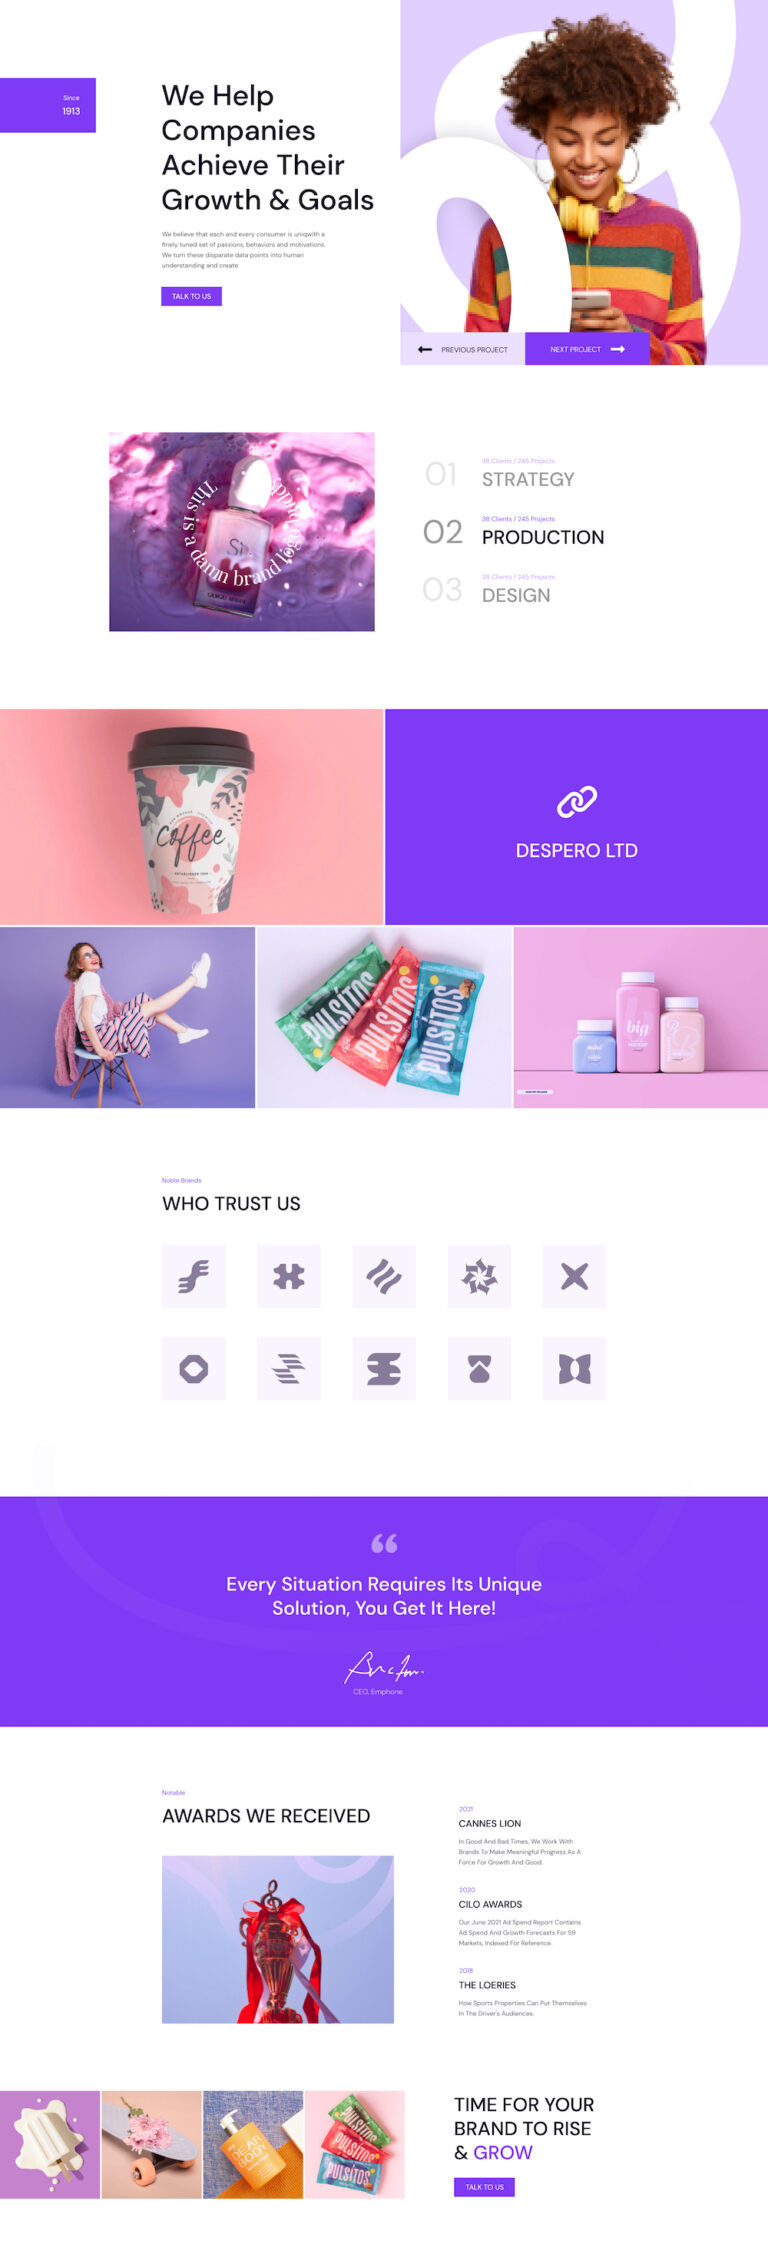 introducing-ad-agency-a-free-layout-bundle-for-sp-page-builder-pro